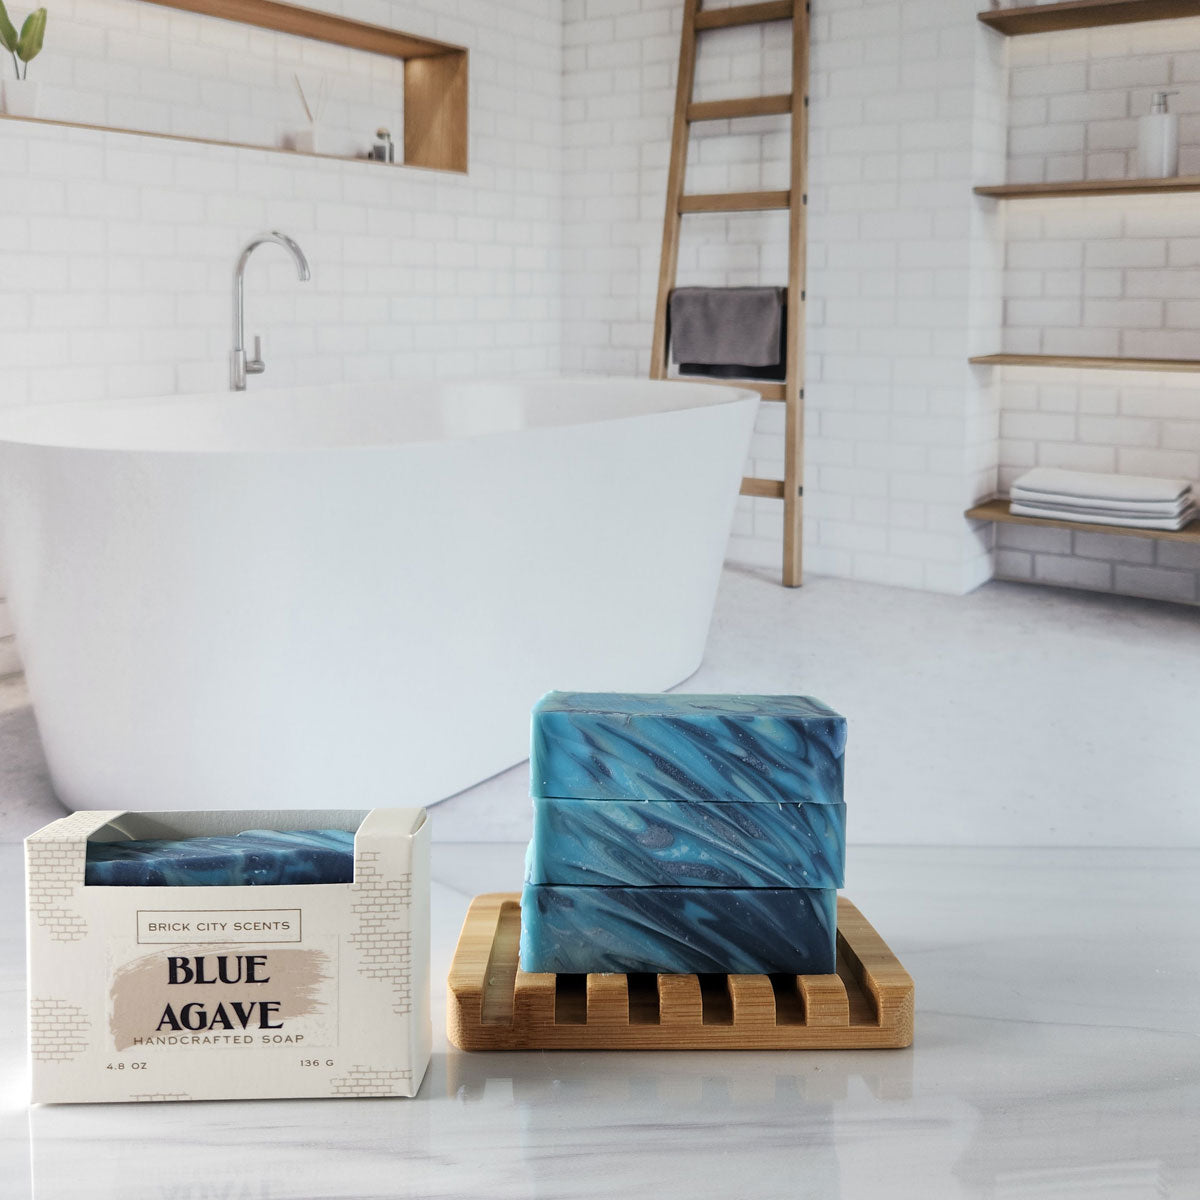 Blue agave body soap with recyclable packaging